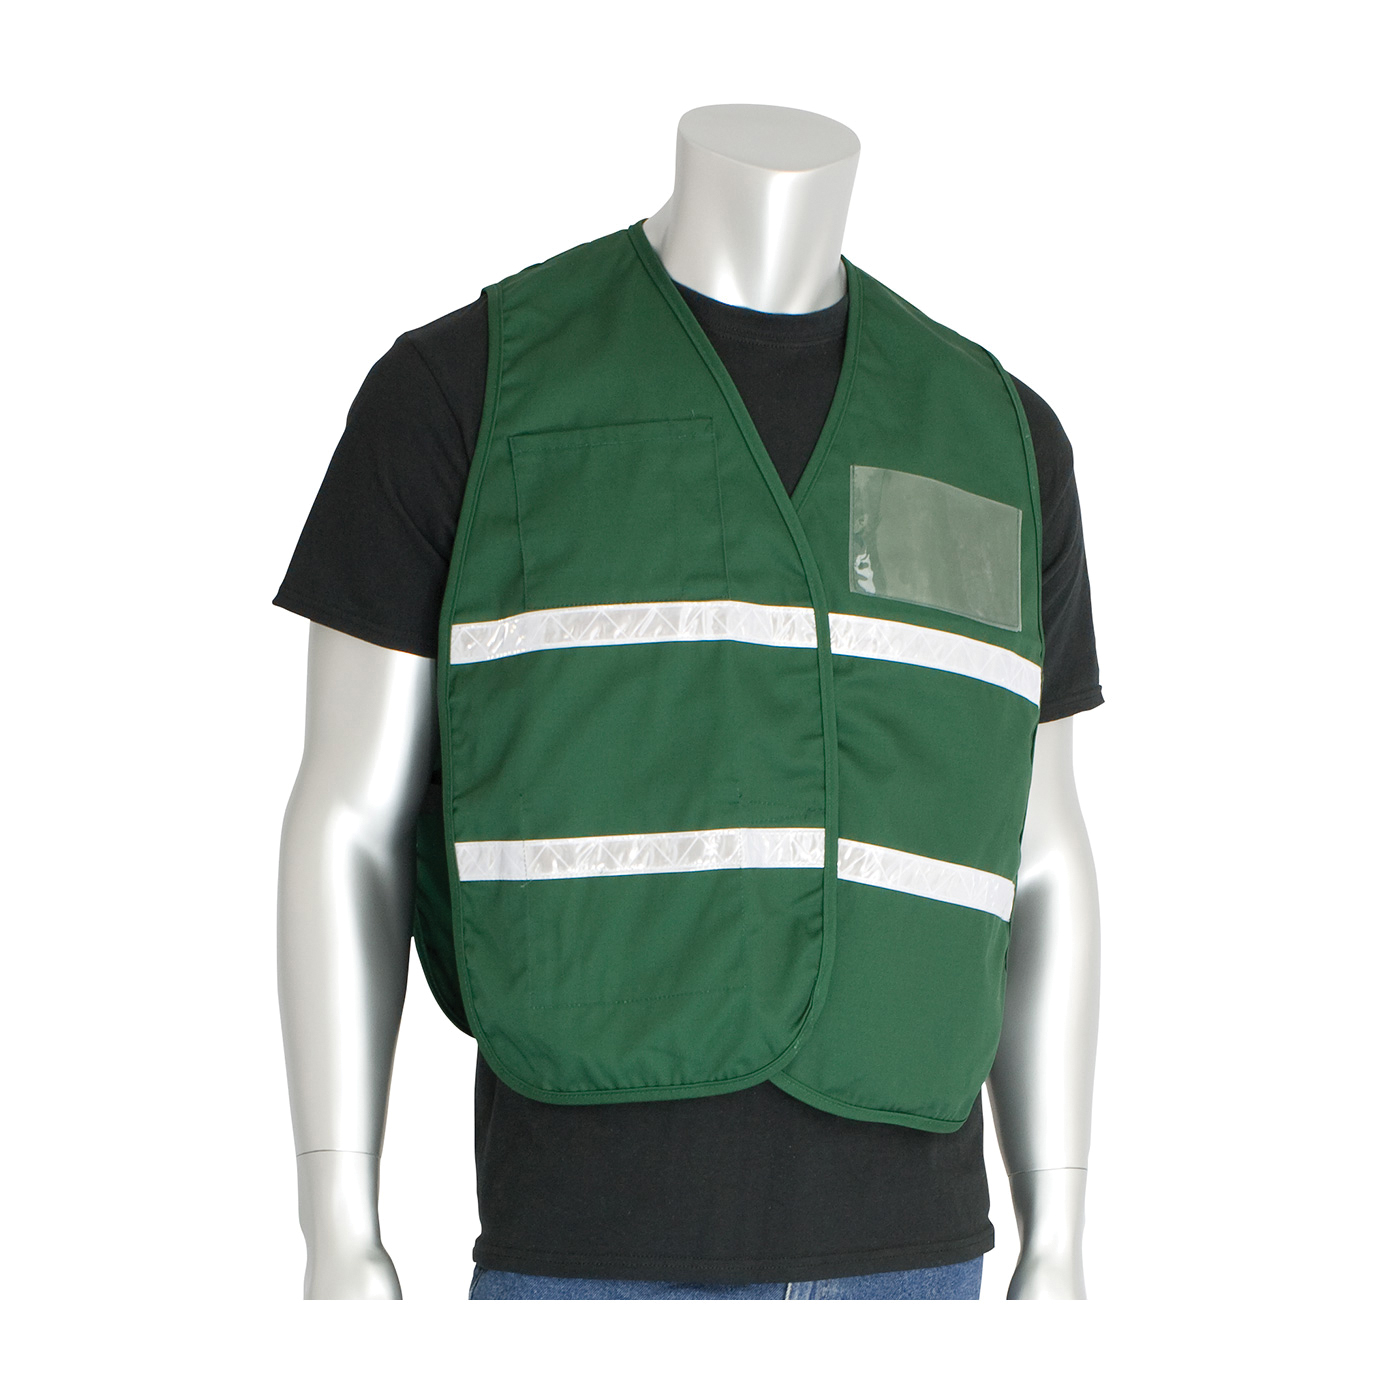 PIP® 300-2514/2X-3X 300-2500 Non-ANSI Incident Command Vest, 2XL/3XL, Forest Green, 35% Cotton/65% Polyester, Hook and Loop Closure, 4 Pockets